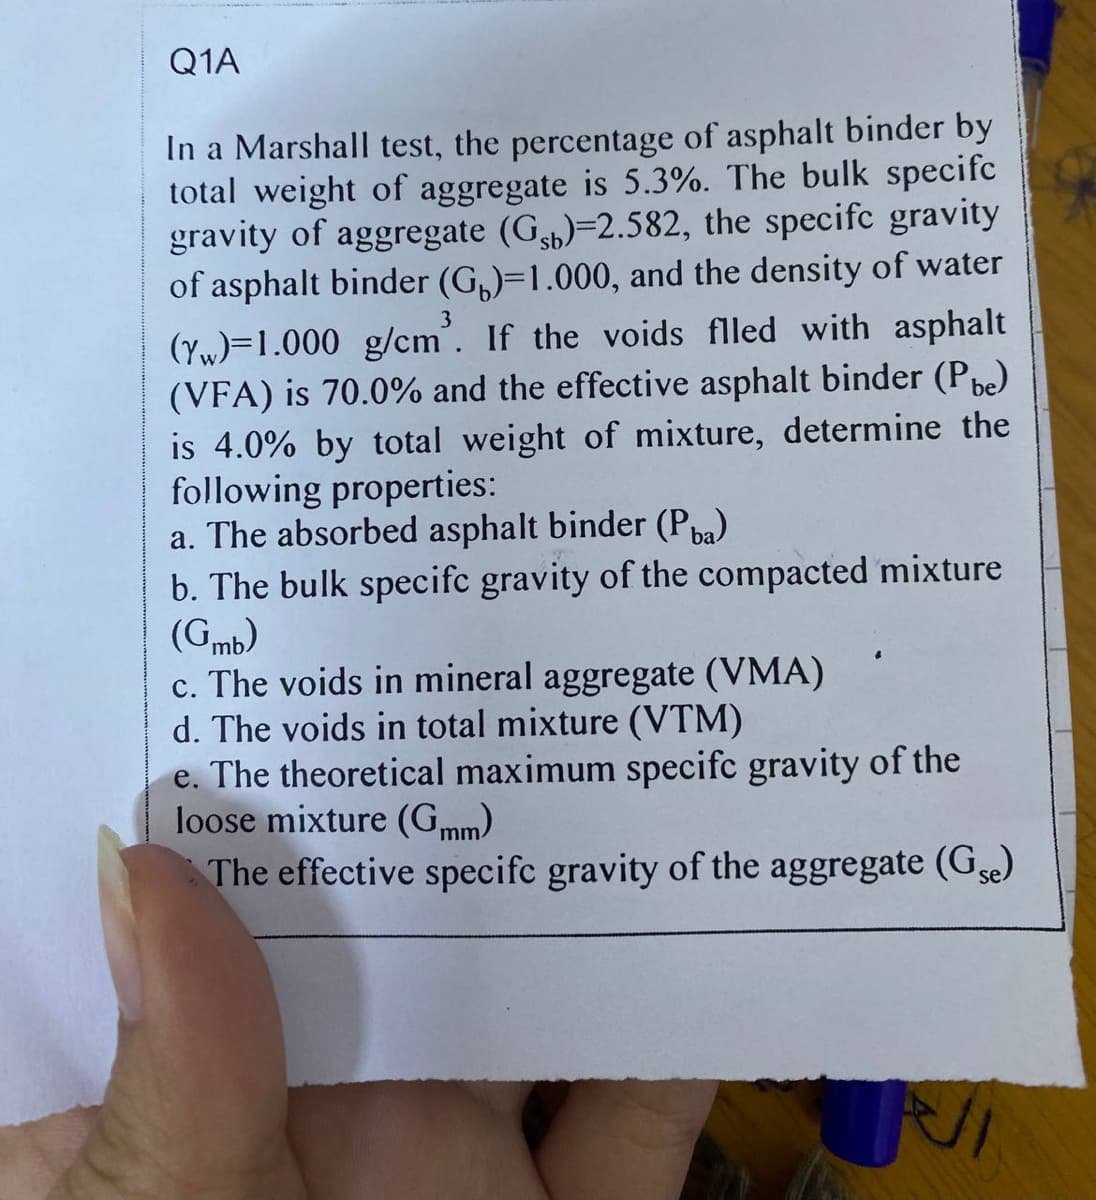 Q1A
In a Marshall test, the percentage of asphalt binder by
total weight of aggregate is 5.3%. The bulk specifc
gravity of aggregate (G)-2.582, the specifc gravity
of asphalt binder (G)=1.000, and the density of water
3
(Yw)=1.000 g/cm. If the voids flled with asphalt
(VFA) is 70.0% and the effective asphalt binder (Pbe)
is 4.0% by total weight of mixture, determine the
following properties:
a. The absorbed asphalt binder (Pba)
b. The bulk specifc gravity of the compacted mixture
(Gmb)
c. The voids in mineral aggregate (VMA)
d. The voids in total mixture (VTM)
e. The theoretical maximum specifc gravity of the
loose mixture (Gmm)
The effective specifc gravity of the aggregate (Gse)
ال